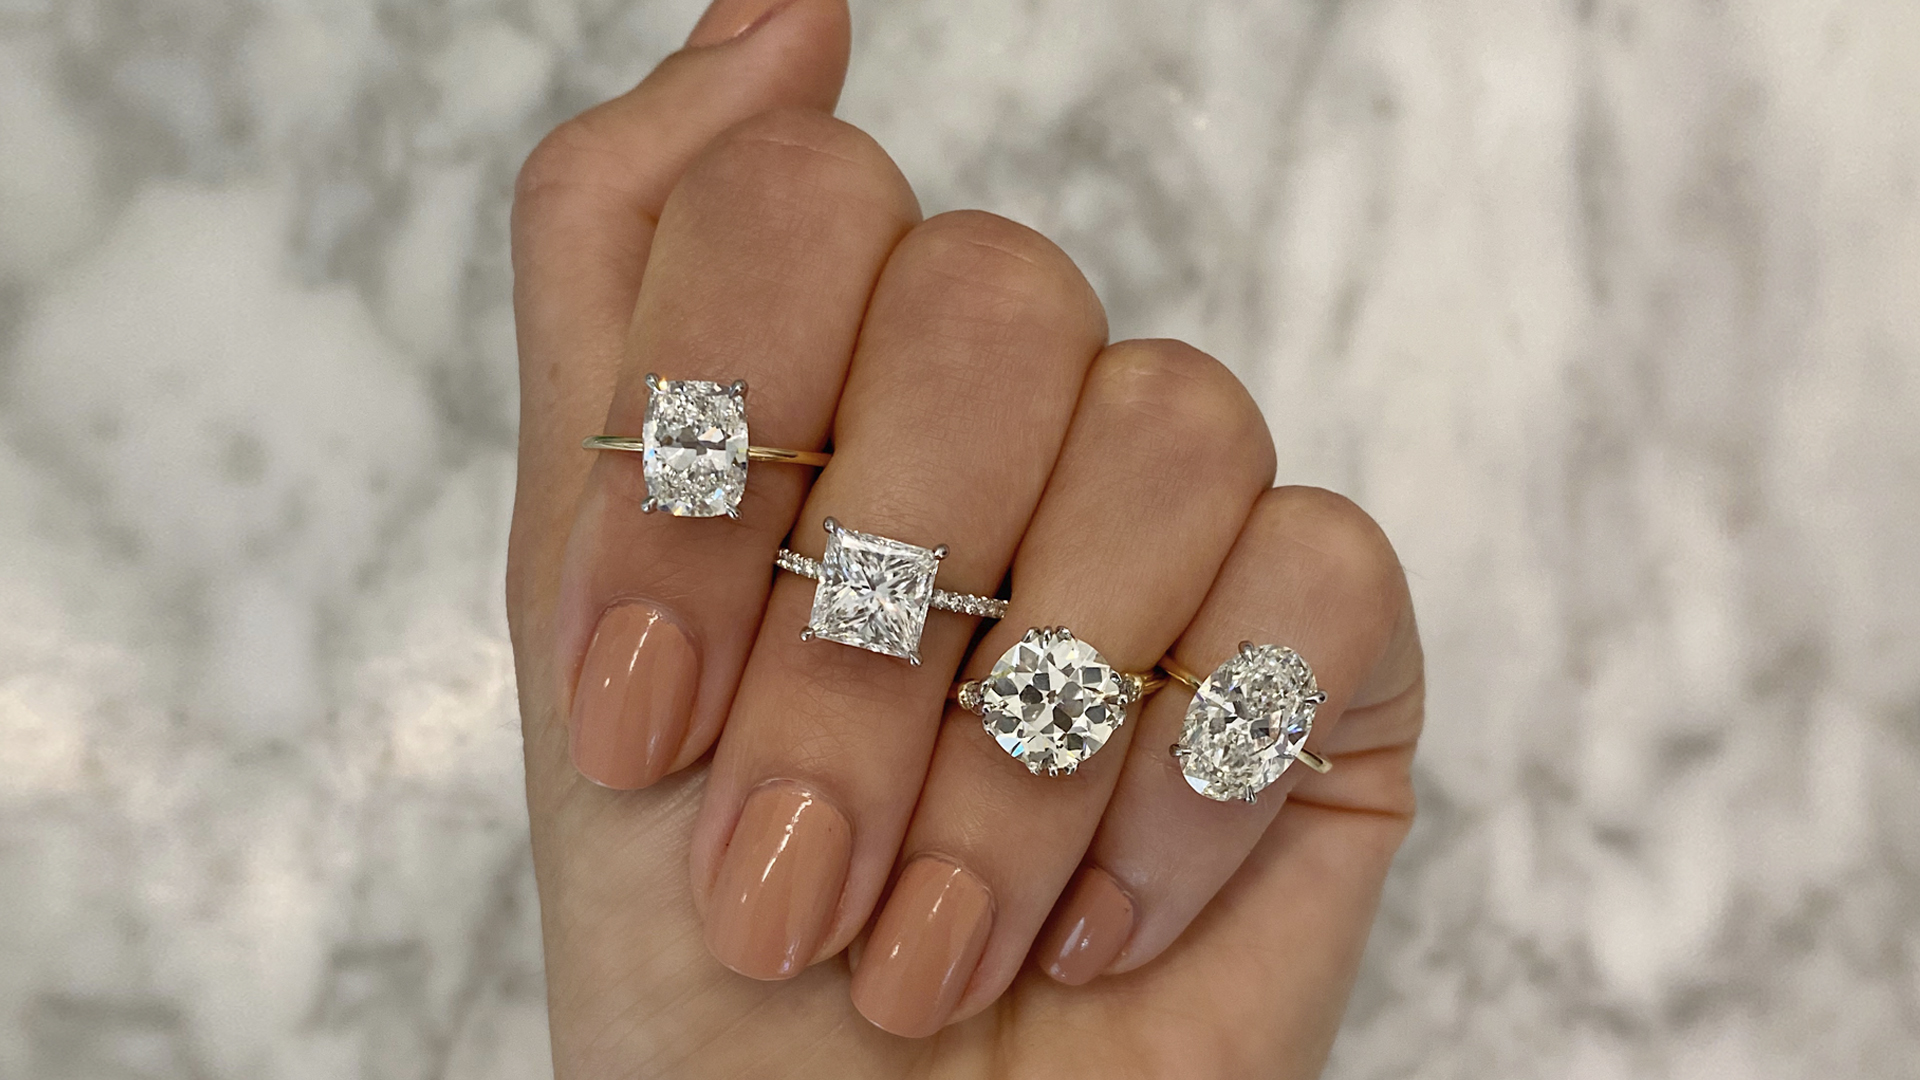 How to Design The Natural Diamond Engagement Ring of Your Dreams - Only Natural Diamonds